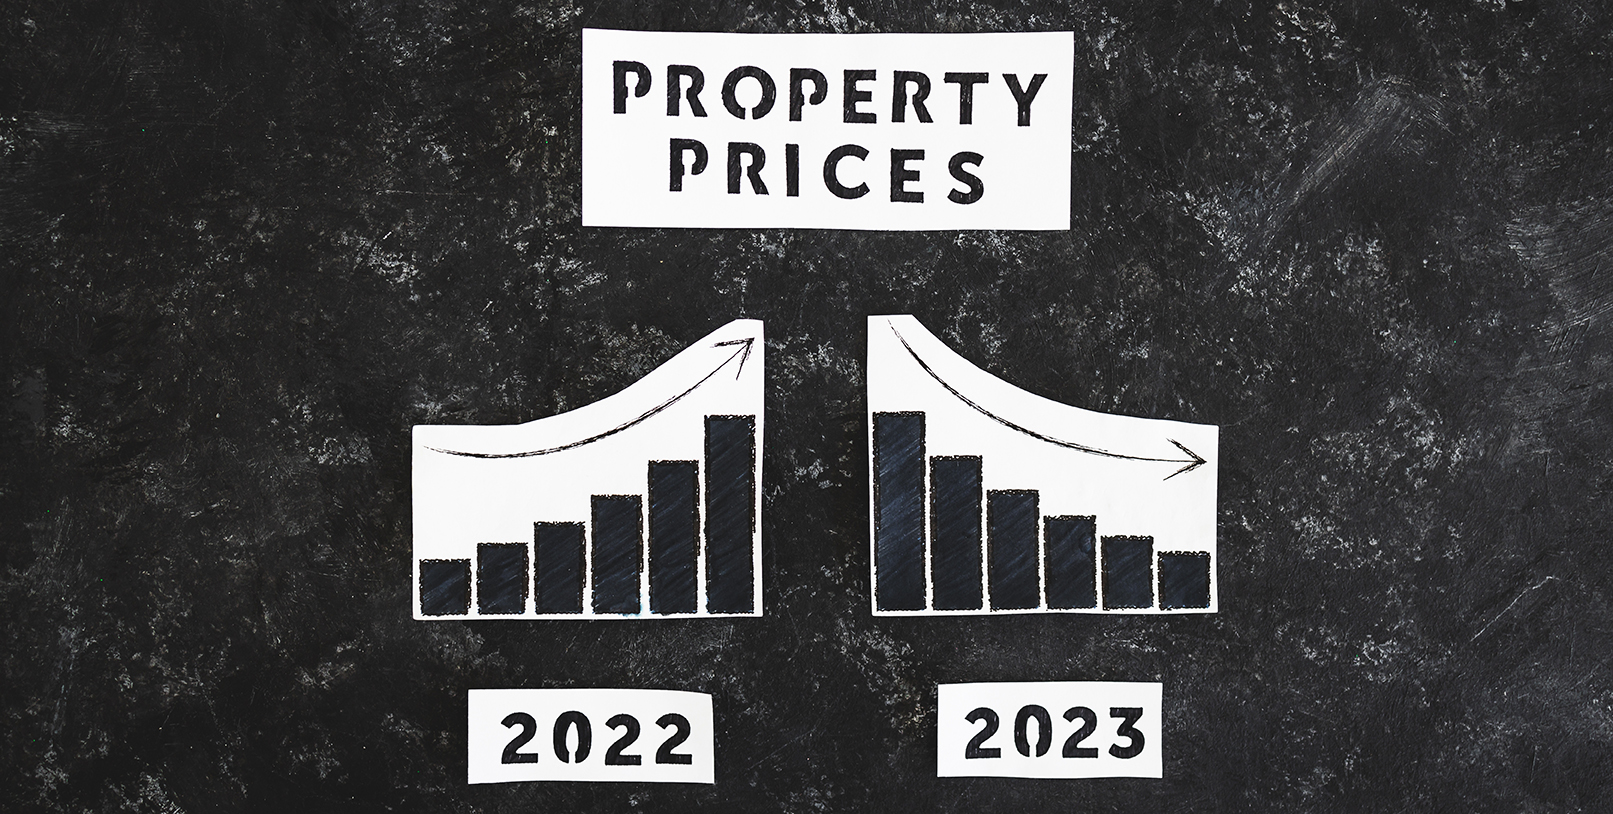 Plan Insurance How Much Will House Prices Drop By?